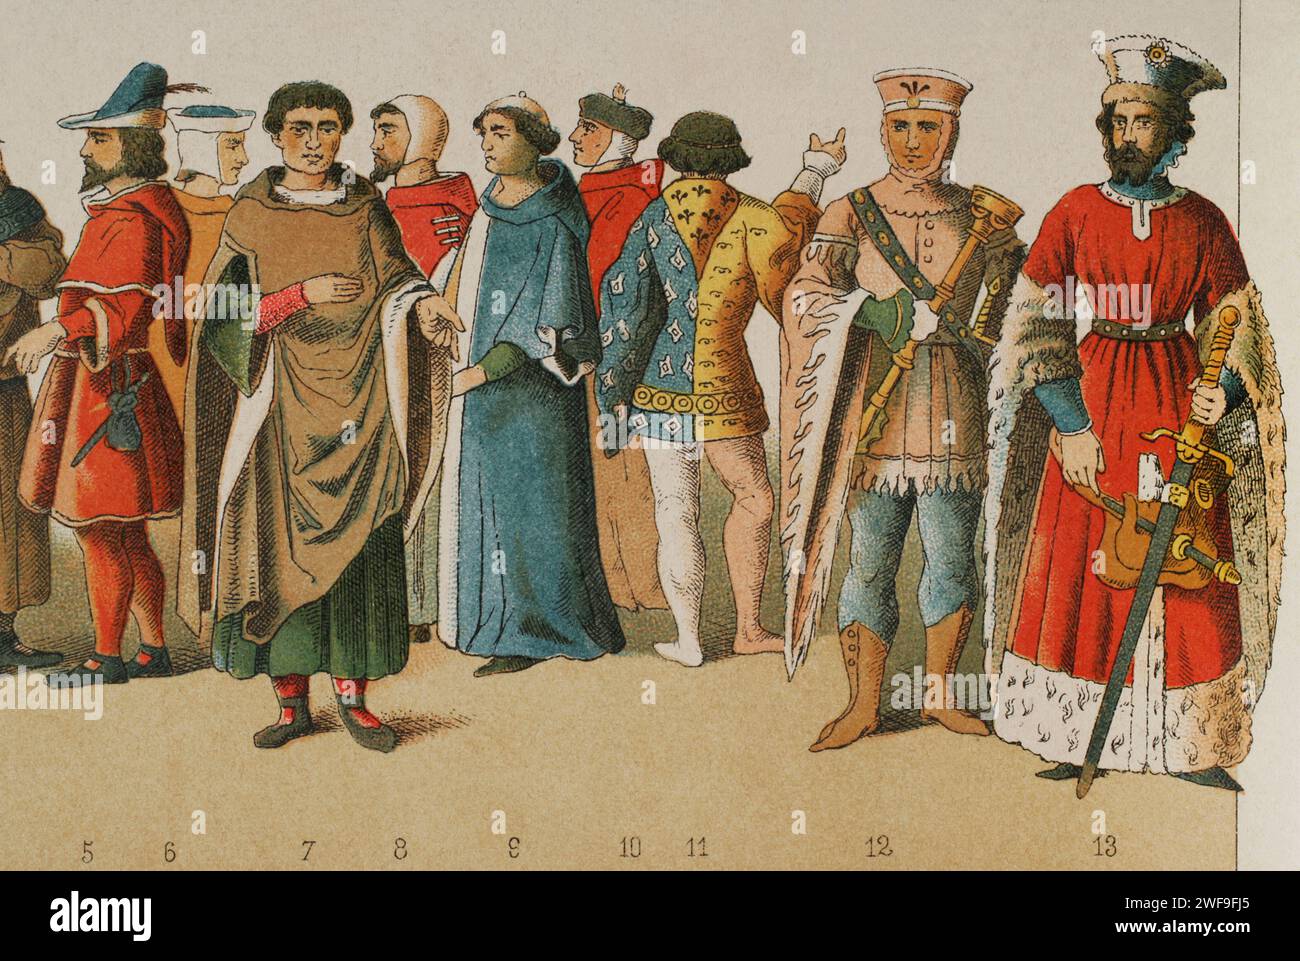 History of France. 1300. From left to right, 5-6-7: citizens, 8-9-10: citizens and nobleman, 11: knight, 12: sergeant-at-arms, 13: Archduke of Burgundy. Chromolithography. 'Historia Universal', by César Cantú. Volume VI, 1885. Stock Photo